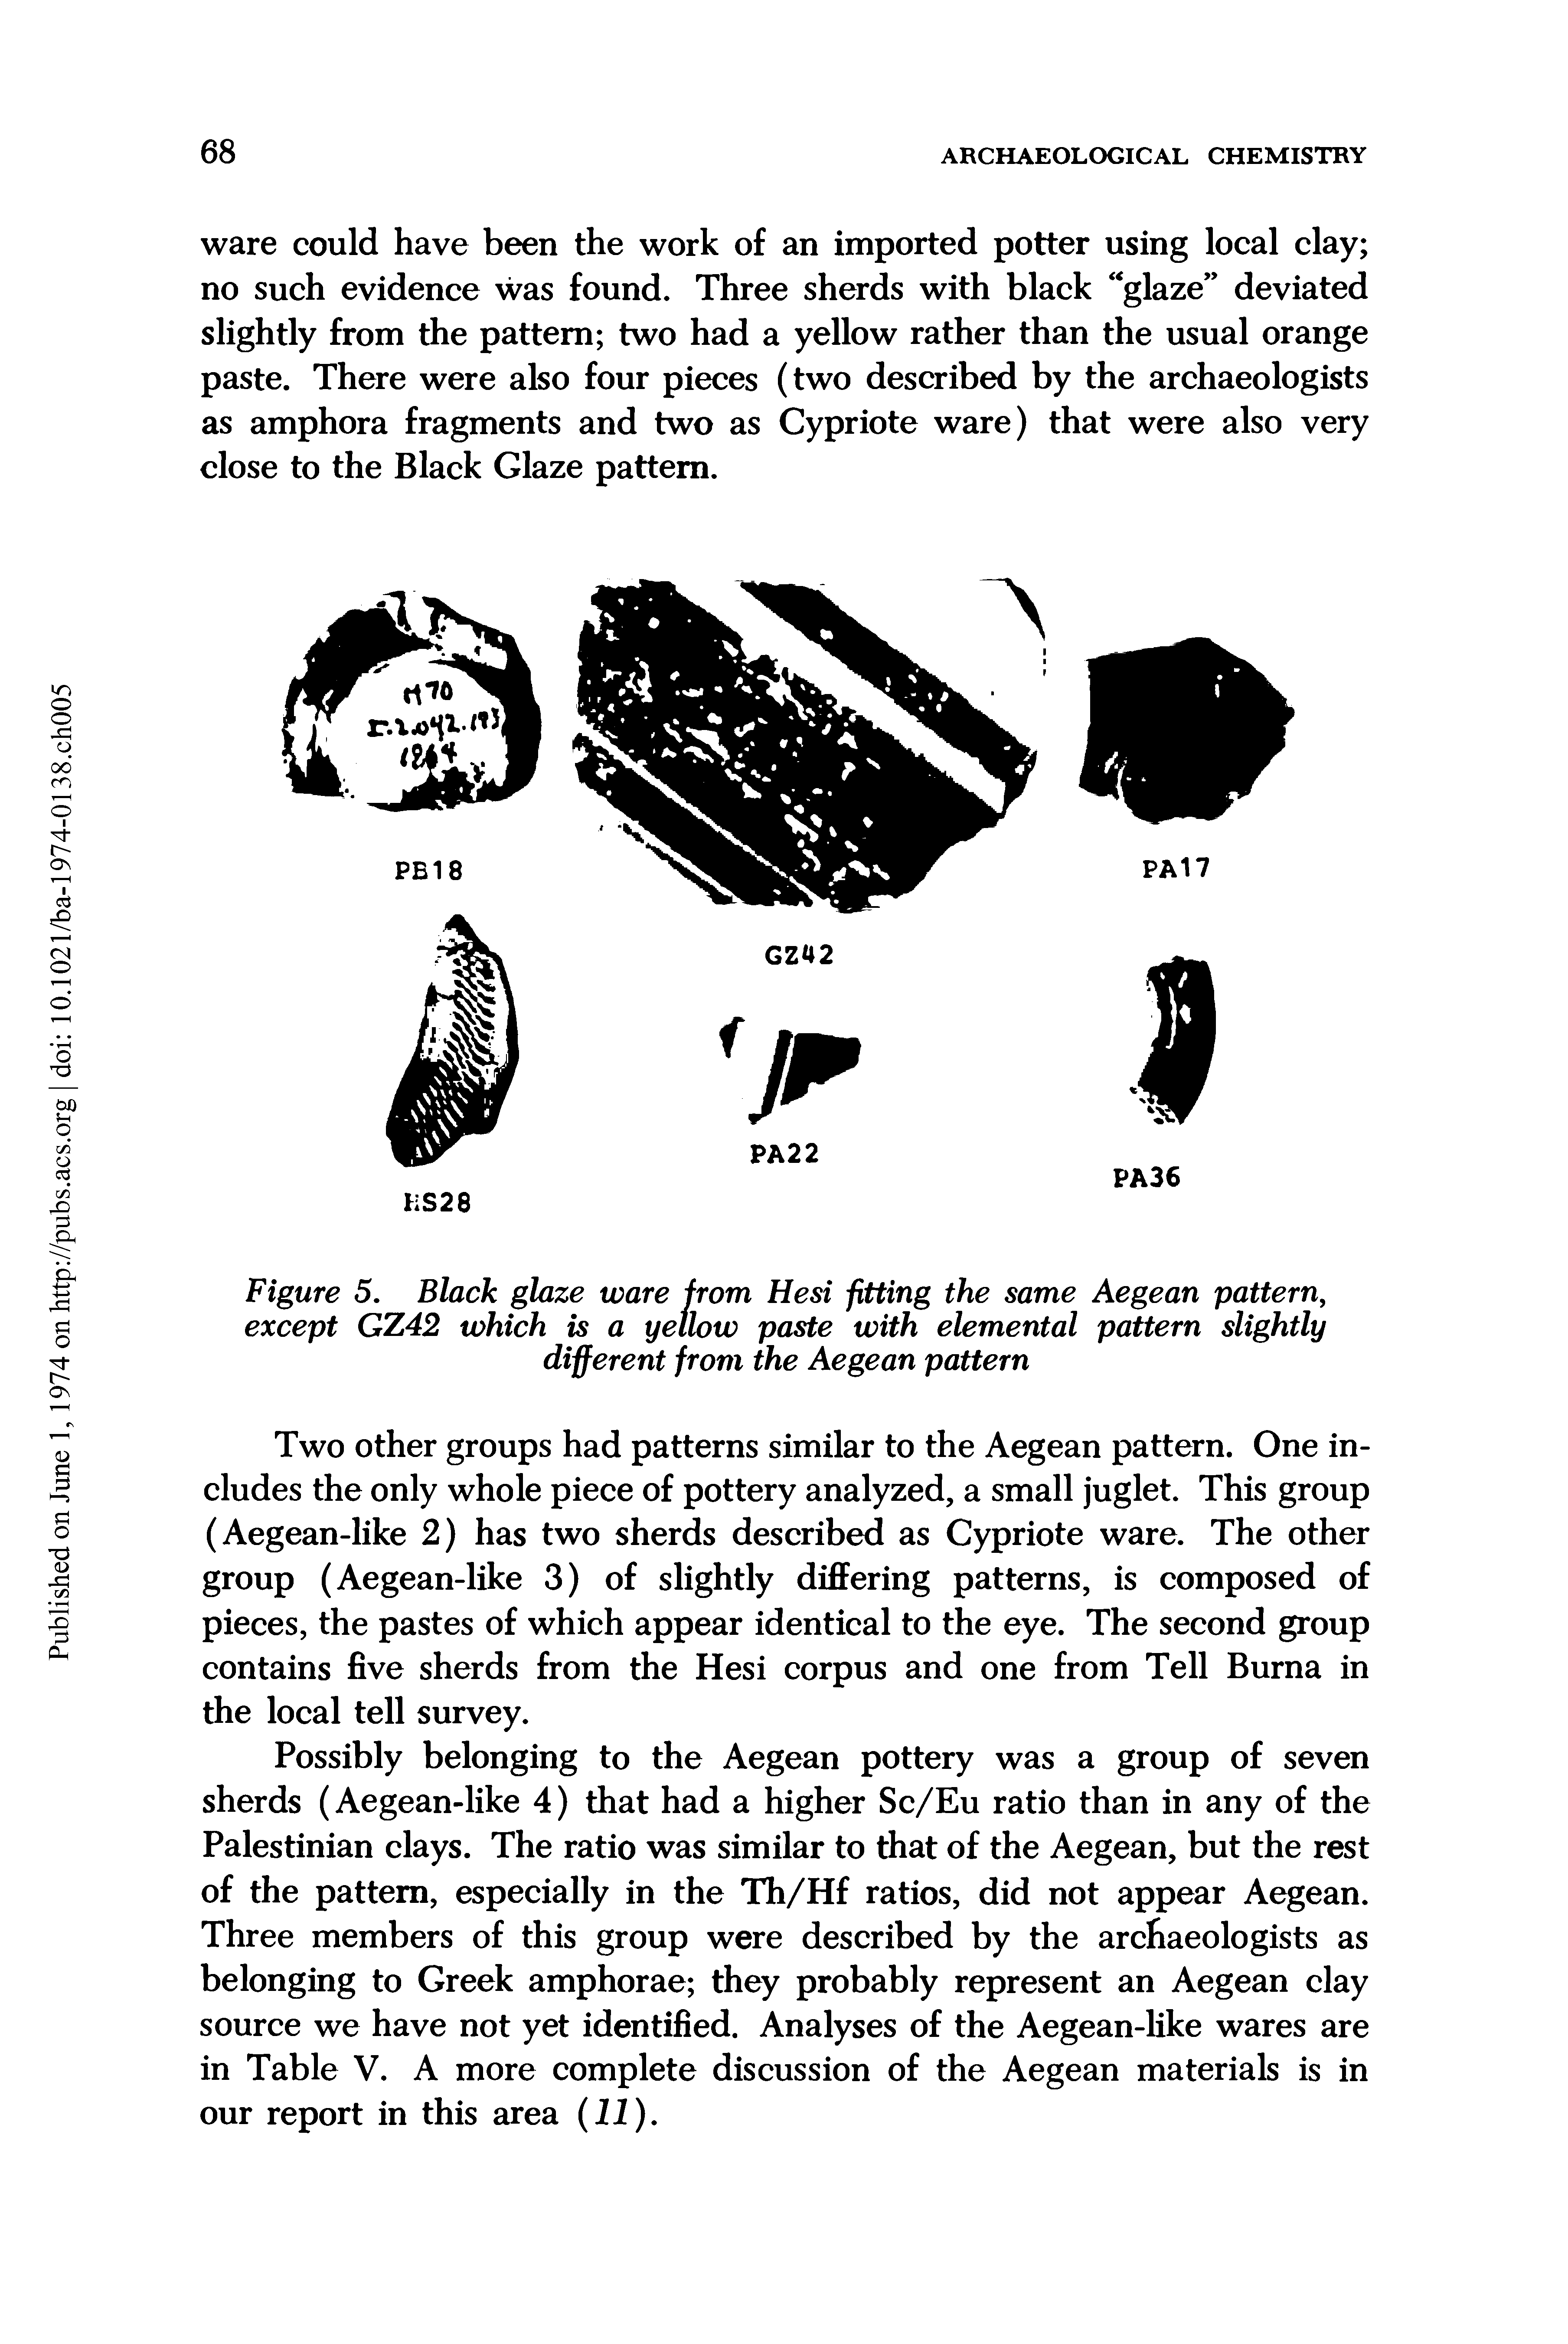 Figure 5. Black glaze ware from Hesi fitting the same Aegean pattern, except GZ42 which is a yellow paste with elemental pattern slightly different from the Aegean pattern...